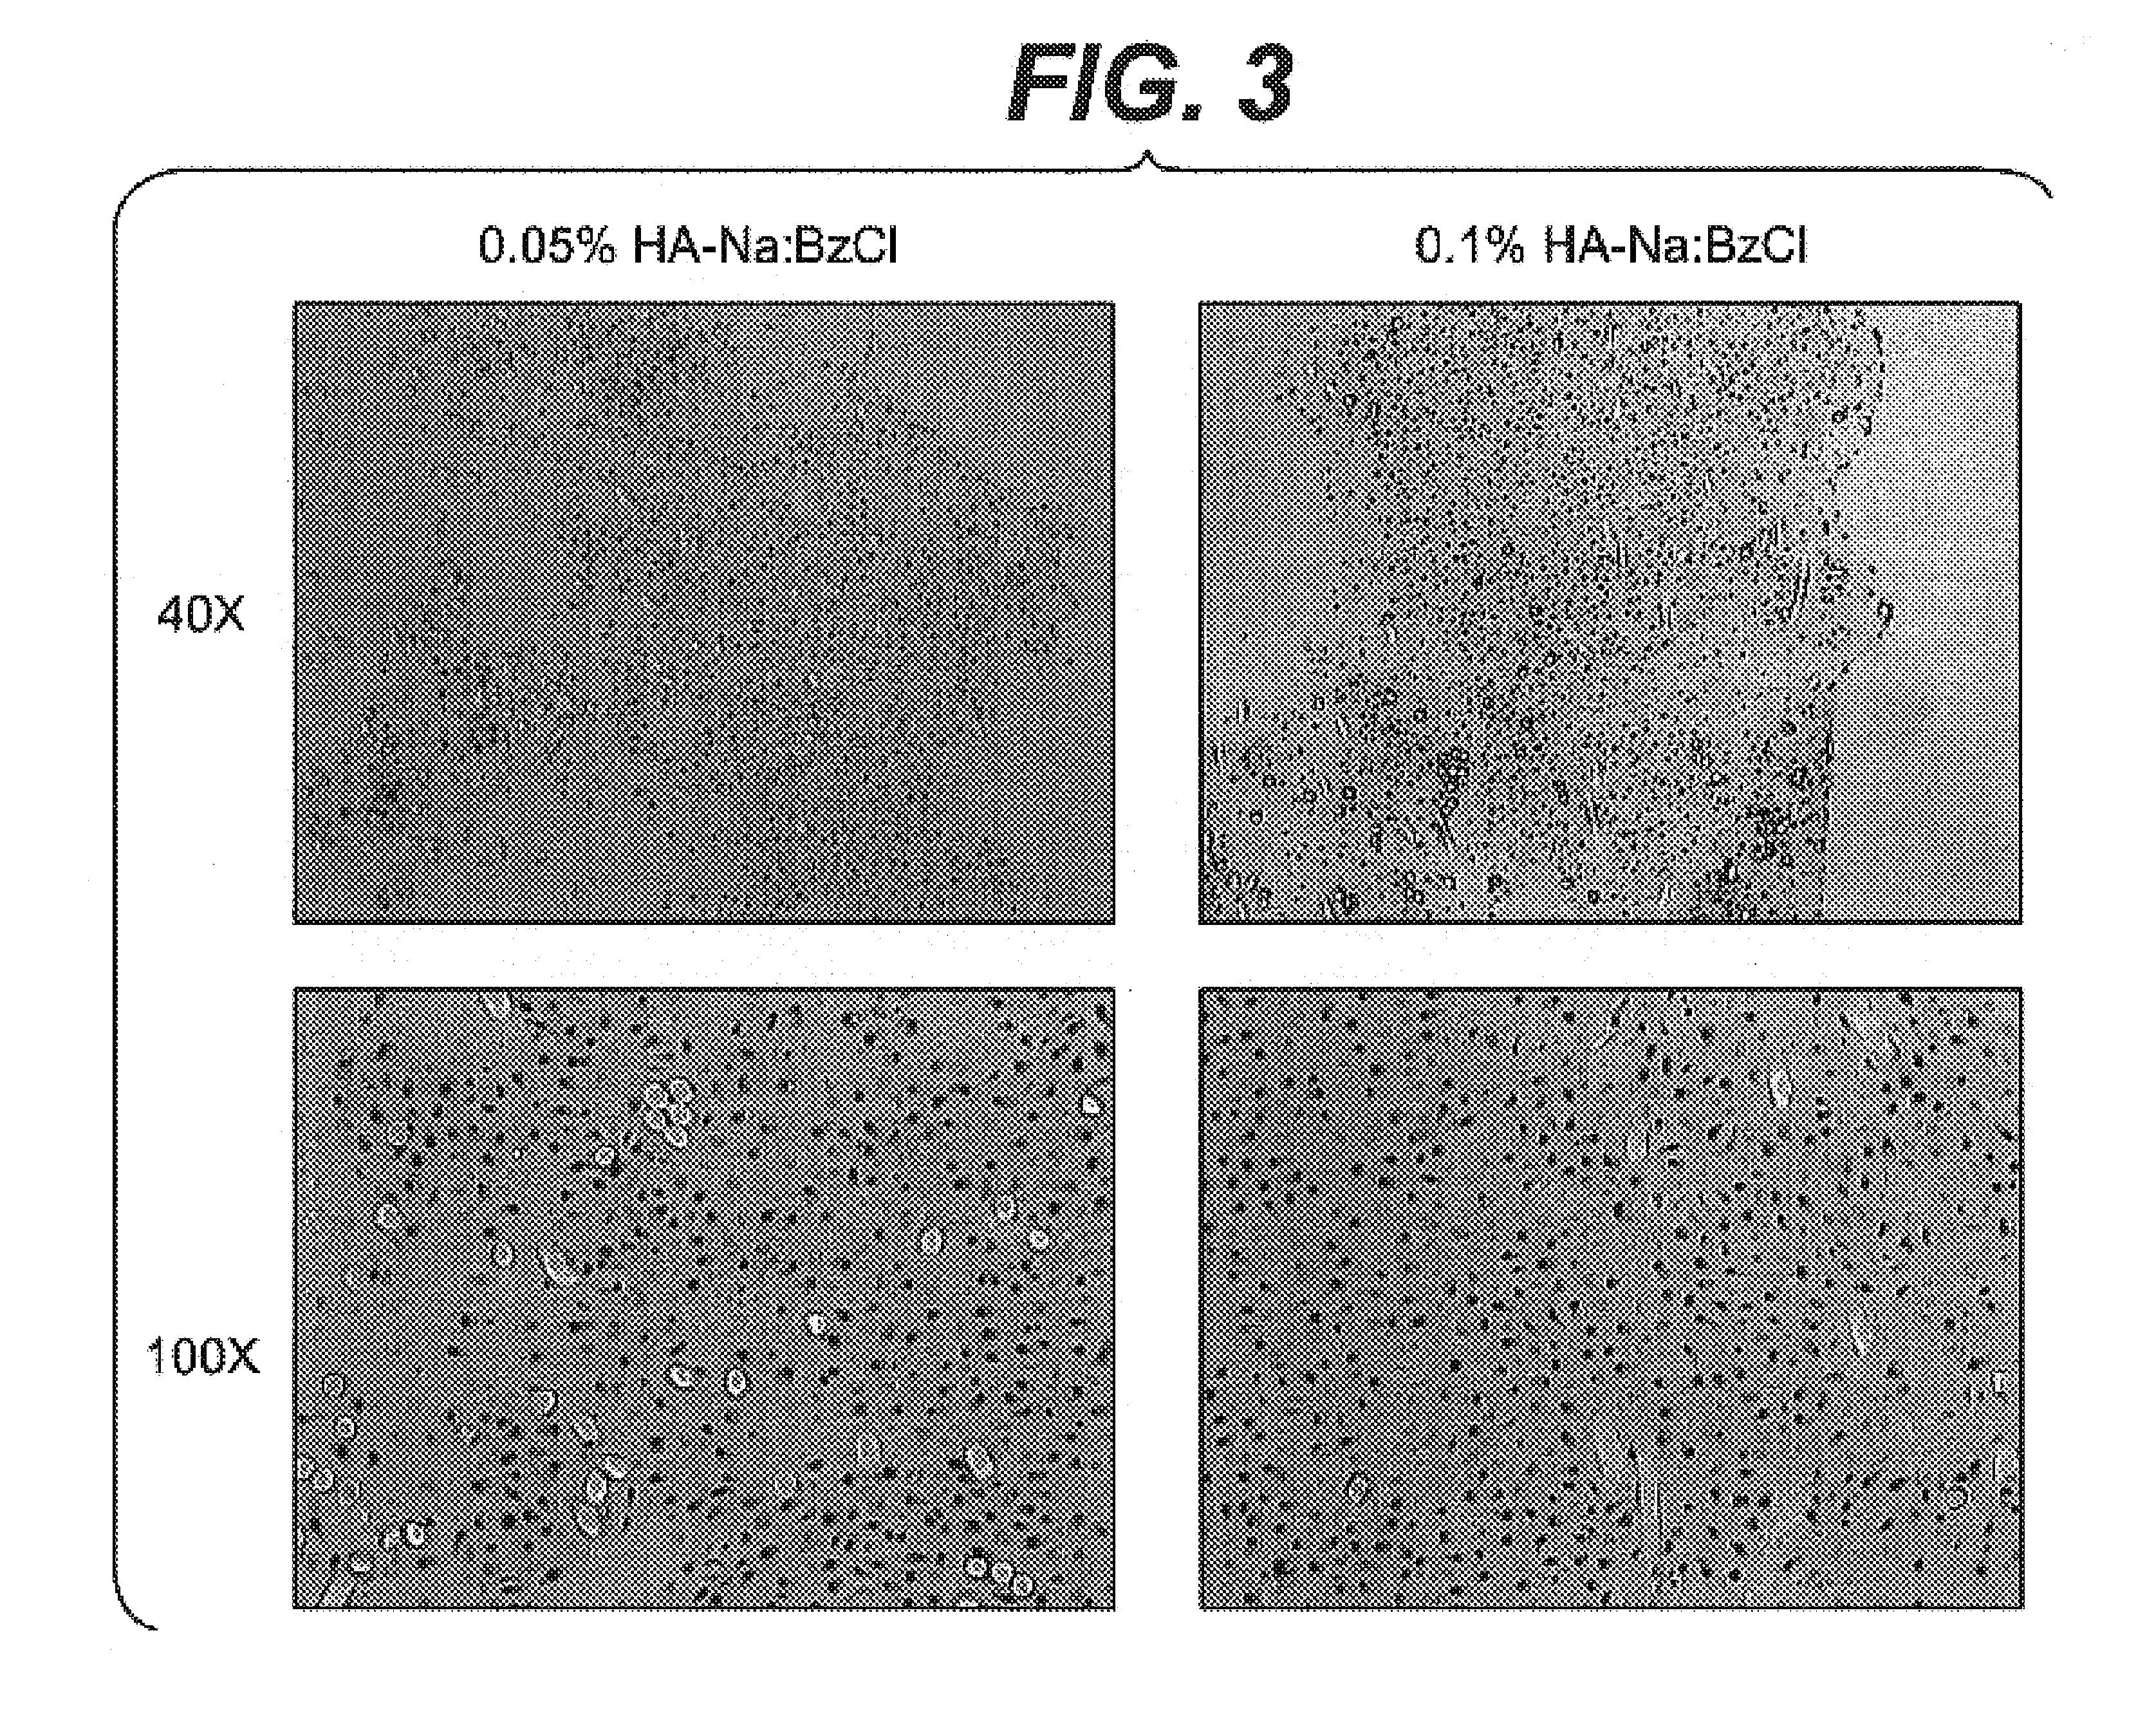 Modified hyaluronic acid for use in musculoskeletal tissue repair